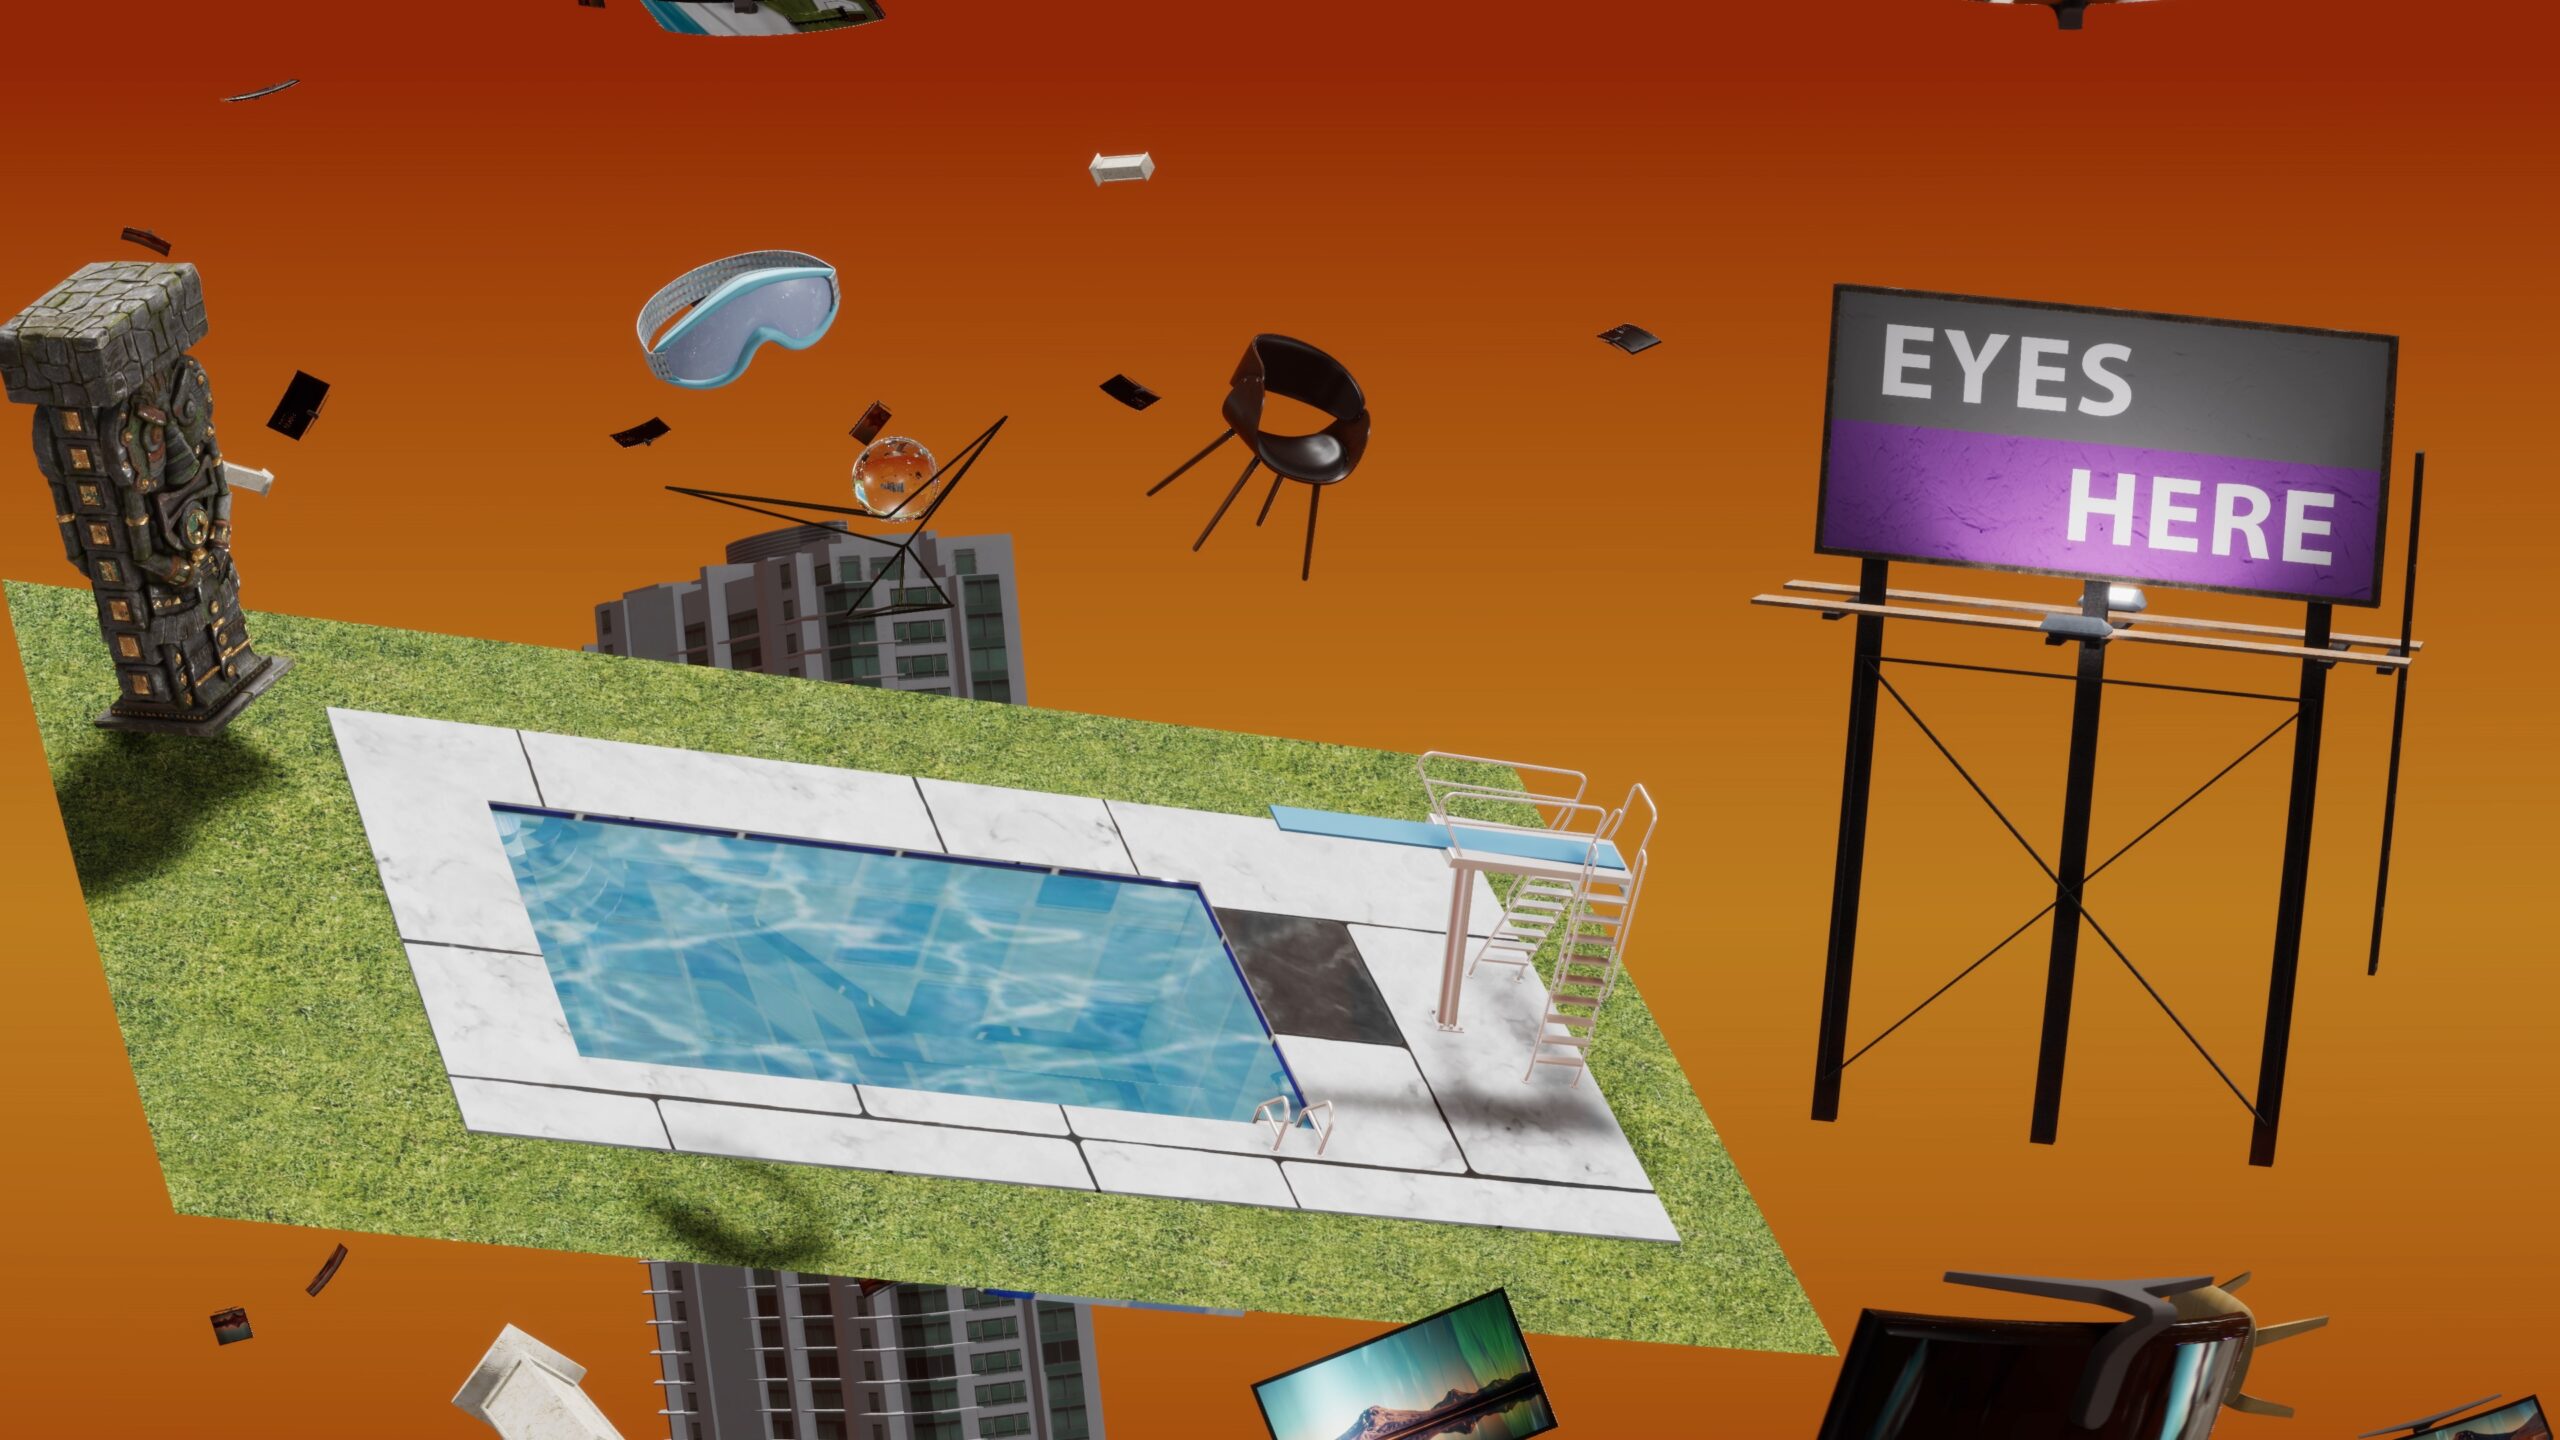 Image of a pool, chair, TV, virtual reality headset, and billboard reading Eyes Here arranged across an orange gradient background.